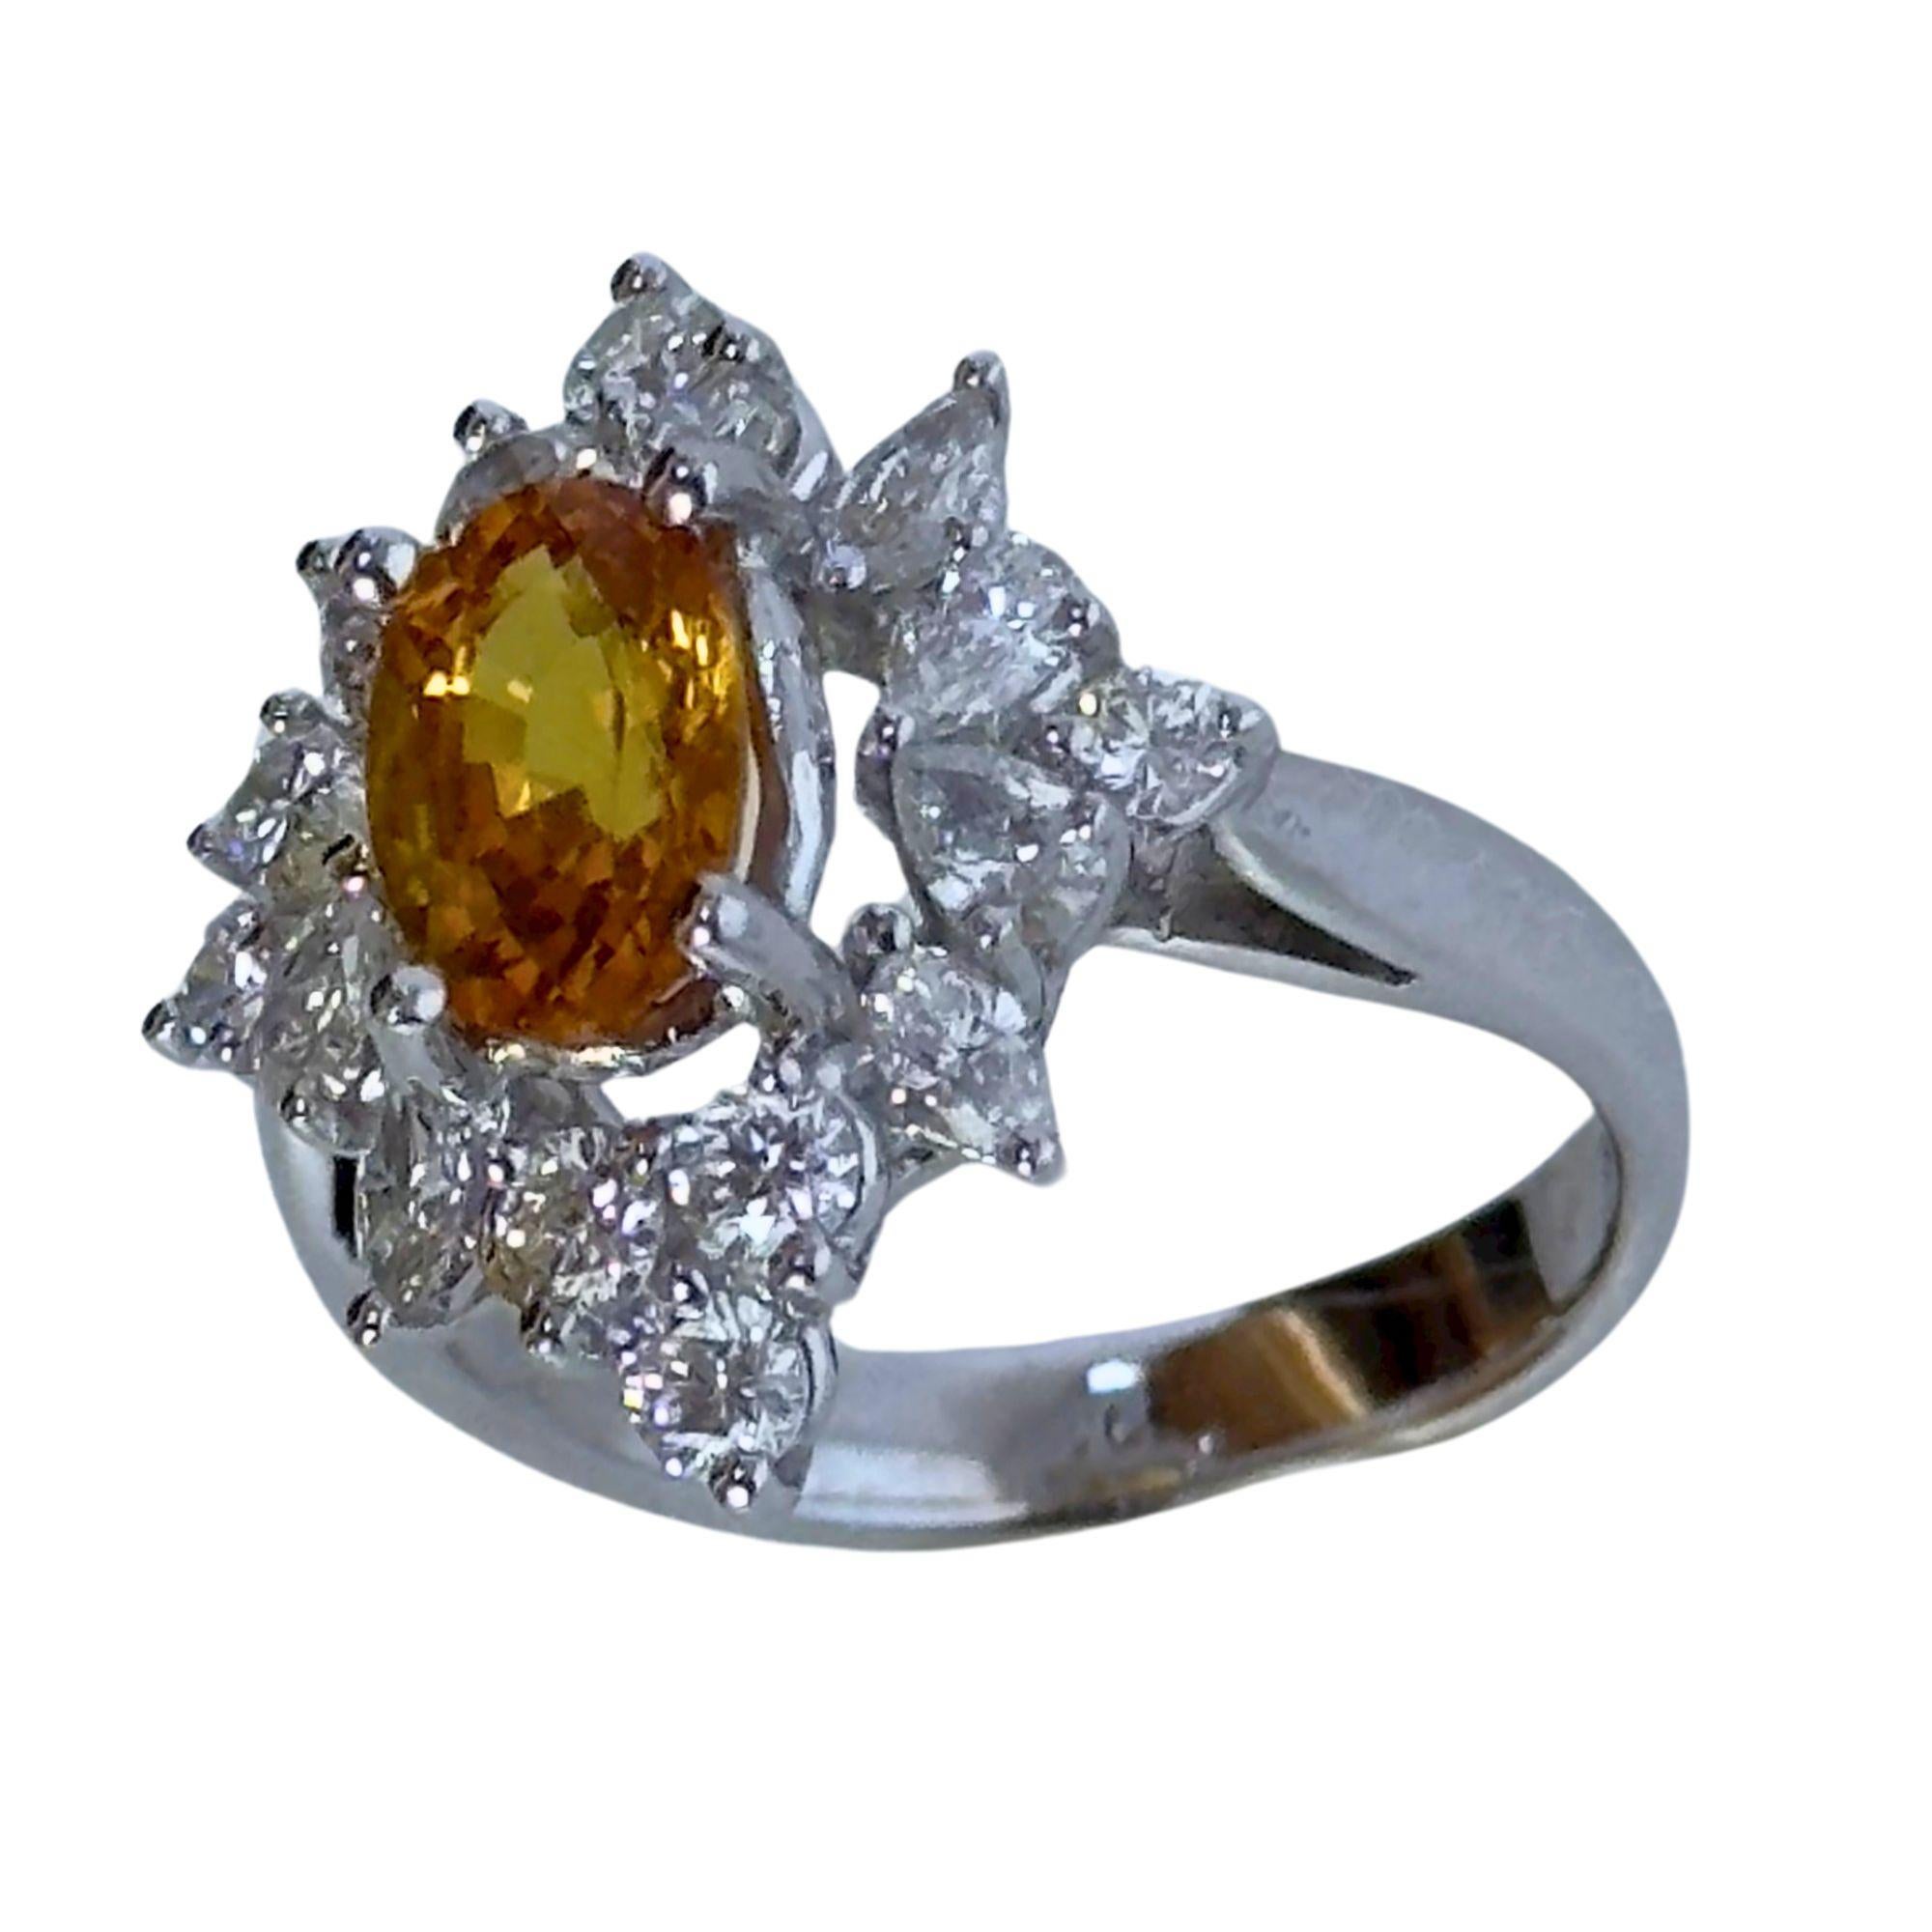 Capture the essence of a sunlit glow with our 18k White and Yellow Sapphire Ring. Weighing 5.99 grams and sized at 6.25, this captivating piece features a central 1.62-carat yellow sapphire, radiating warmth like the sun. Encircled by white diamonds